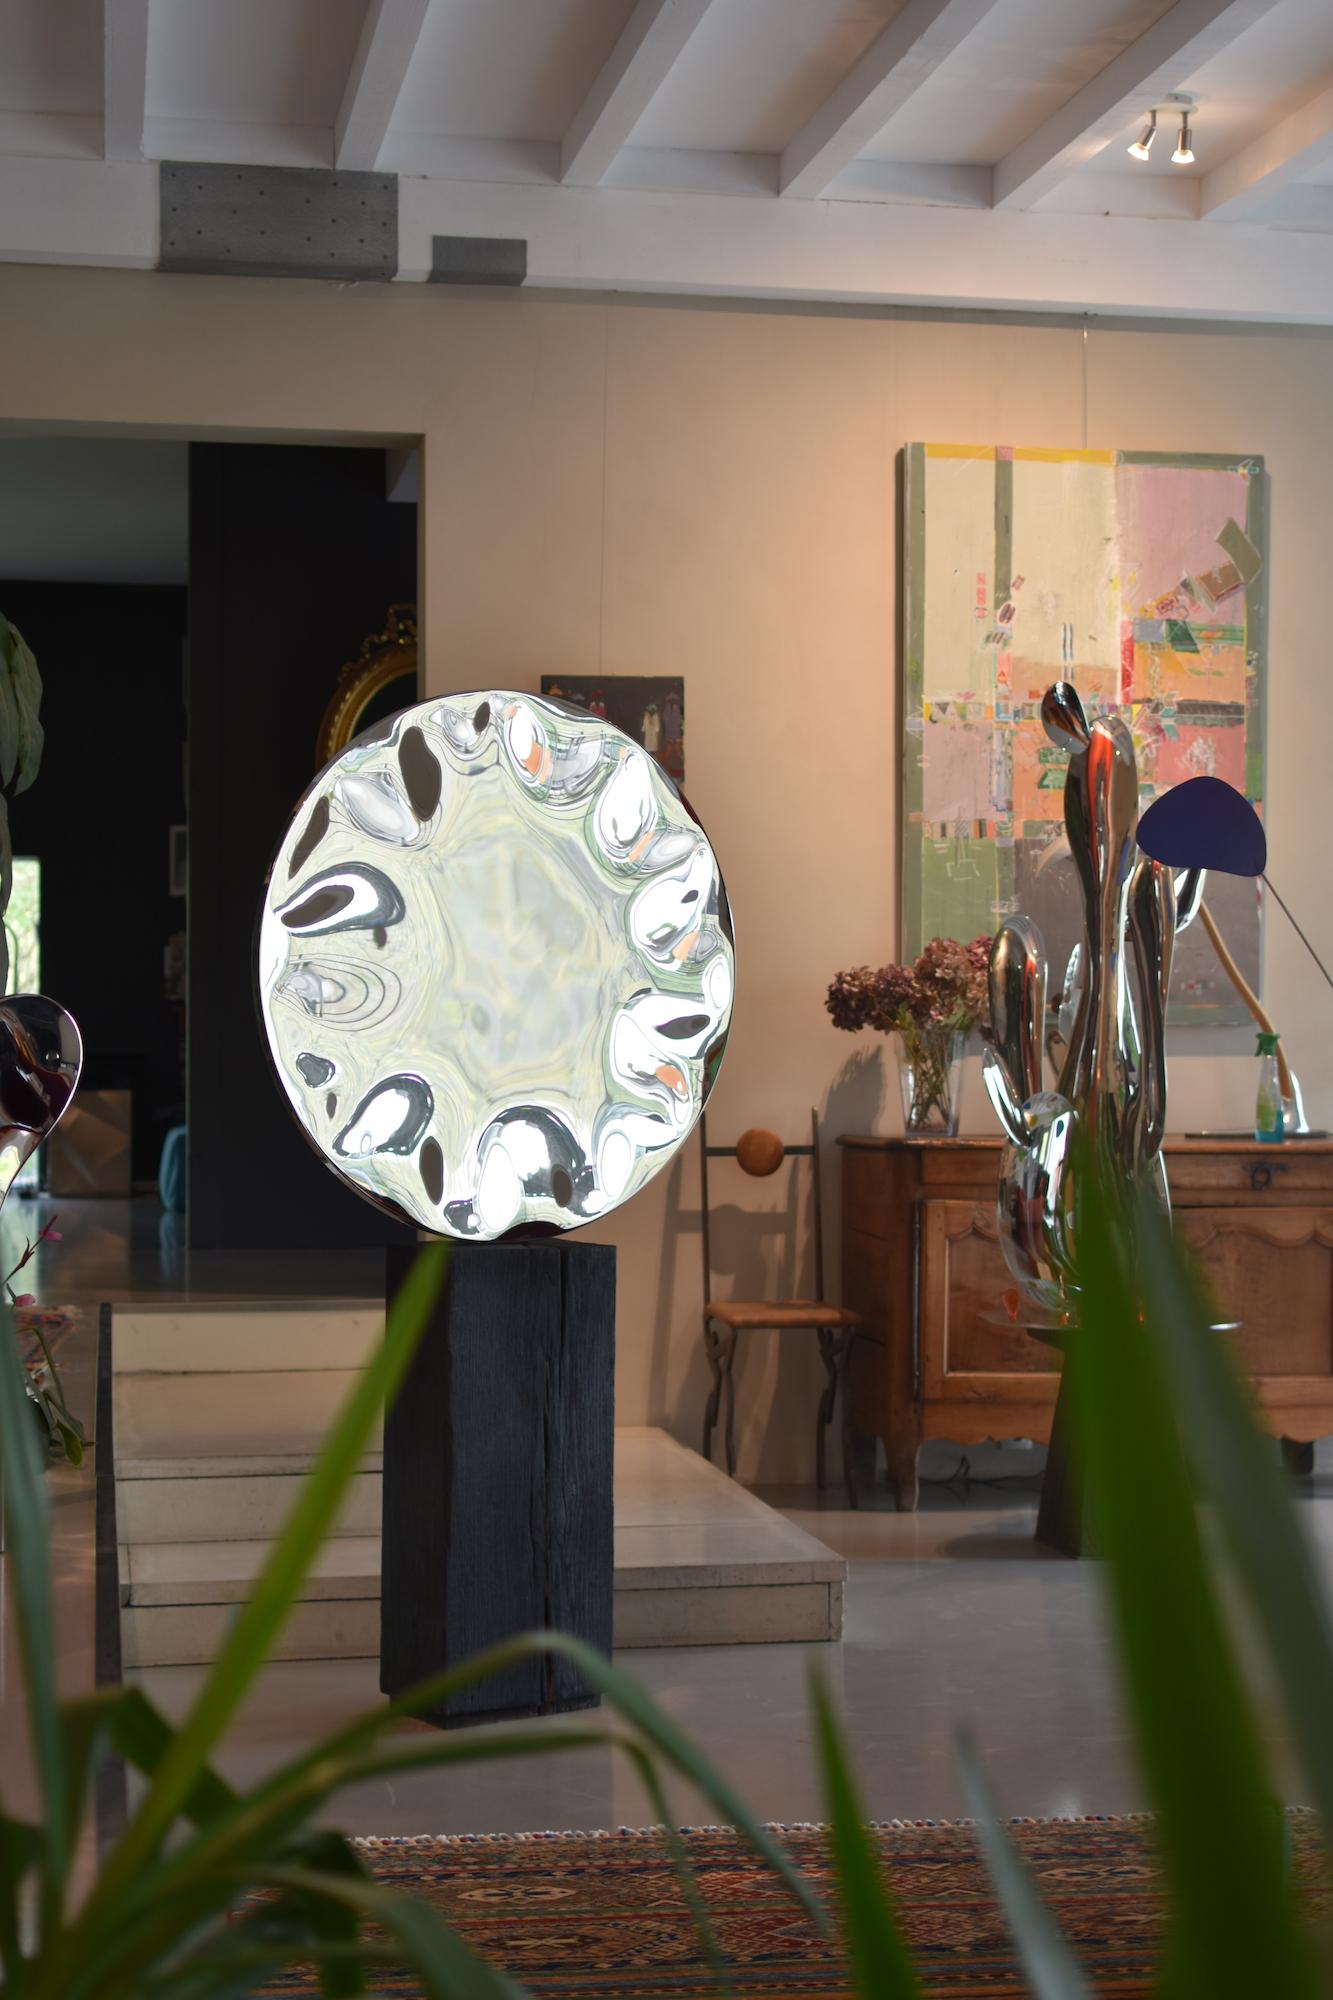 “Shattered” mirror II by Franck K - Stainless steel sculpture, reflection, light For Sale 6